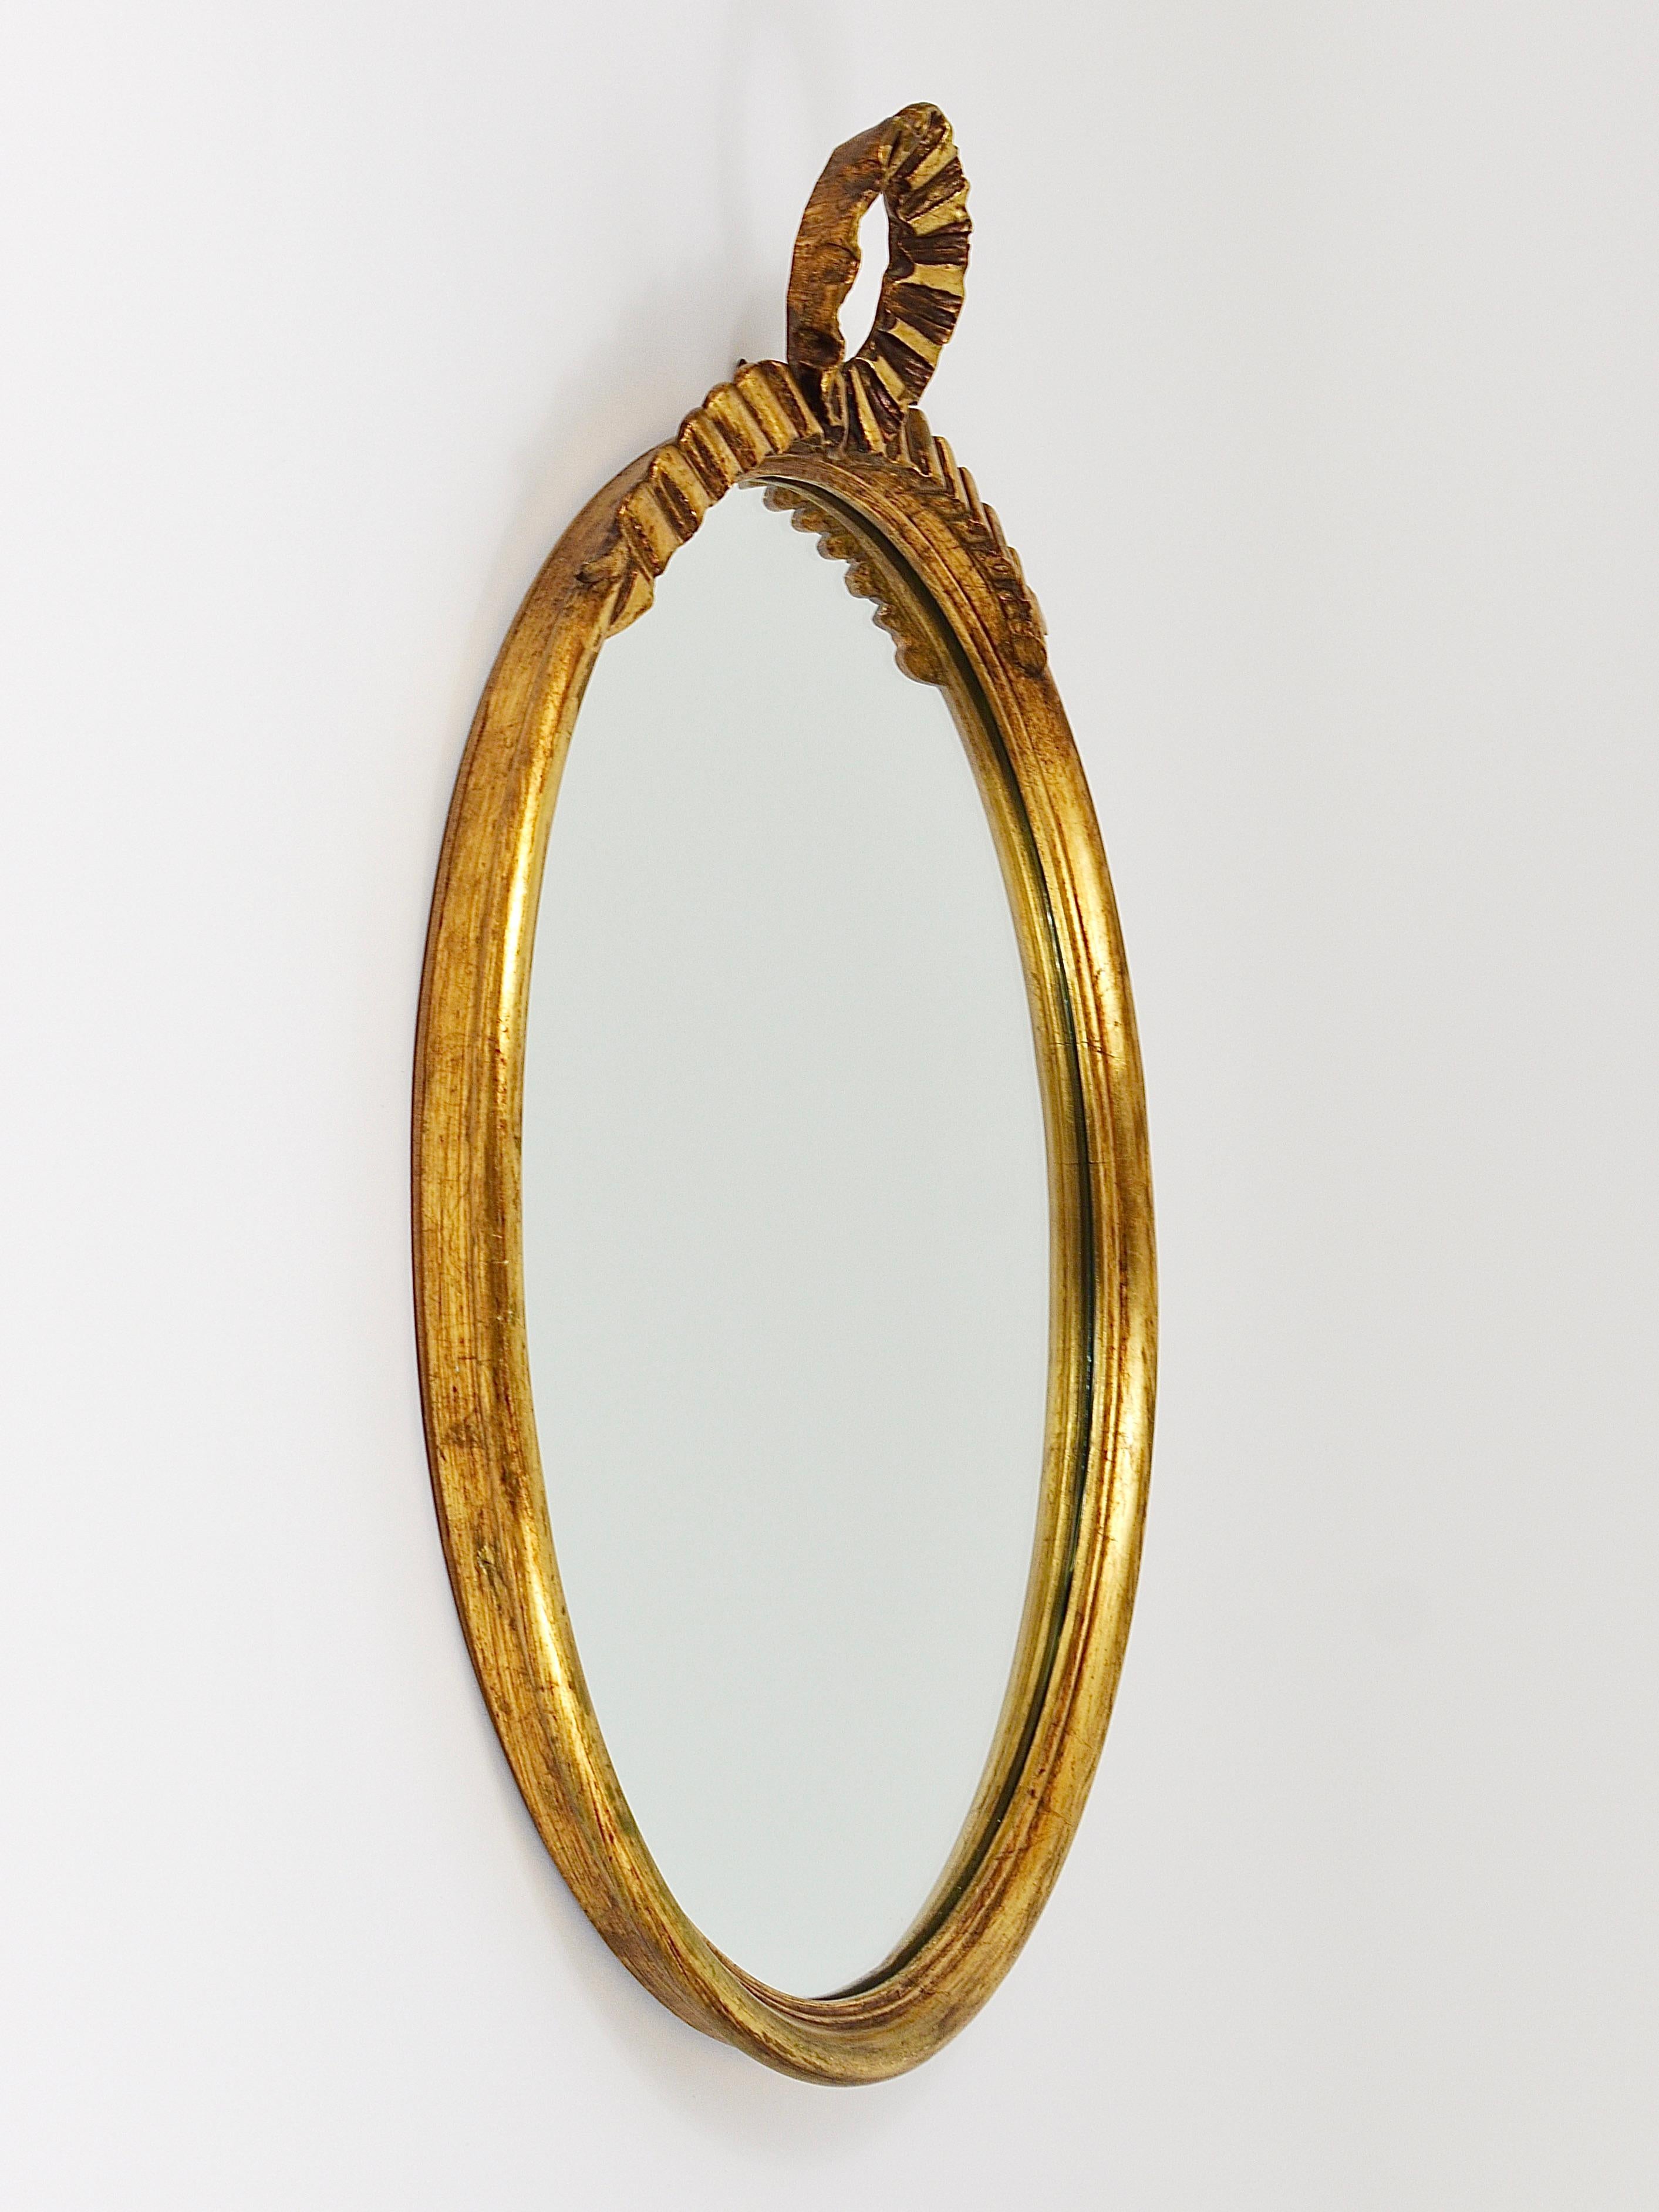 Round Midcentury Gilt Wood Wall Mirror, C. Allodi & G. Subelli, Italy, 1950s For Sale 3